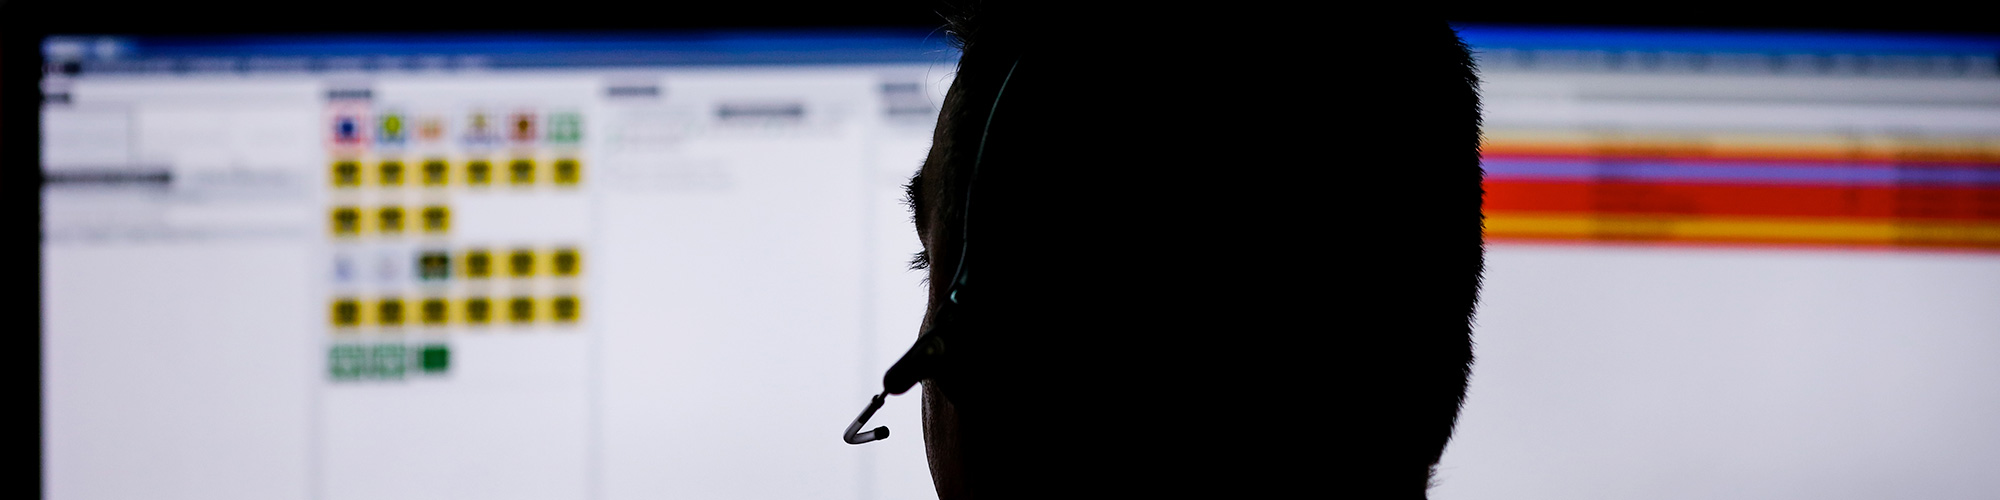 silhouette of a crisis response line operator wearing a headset, sitting at a computer